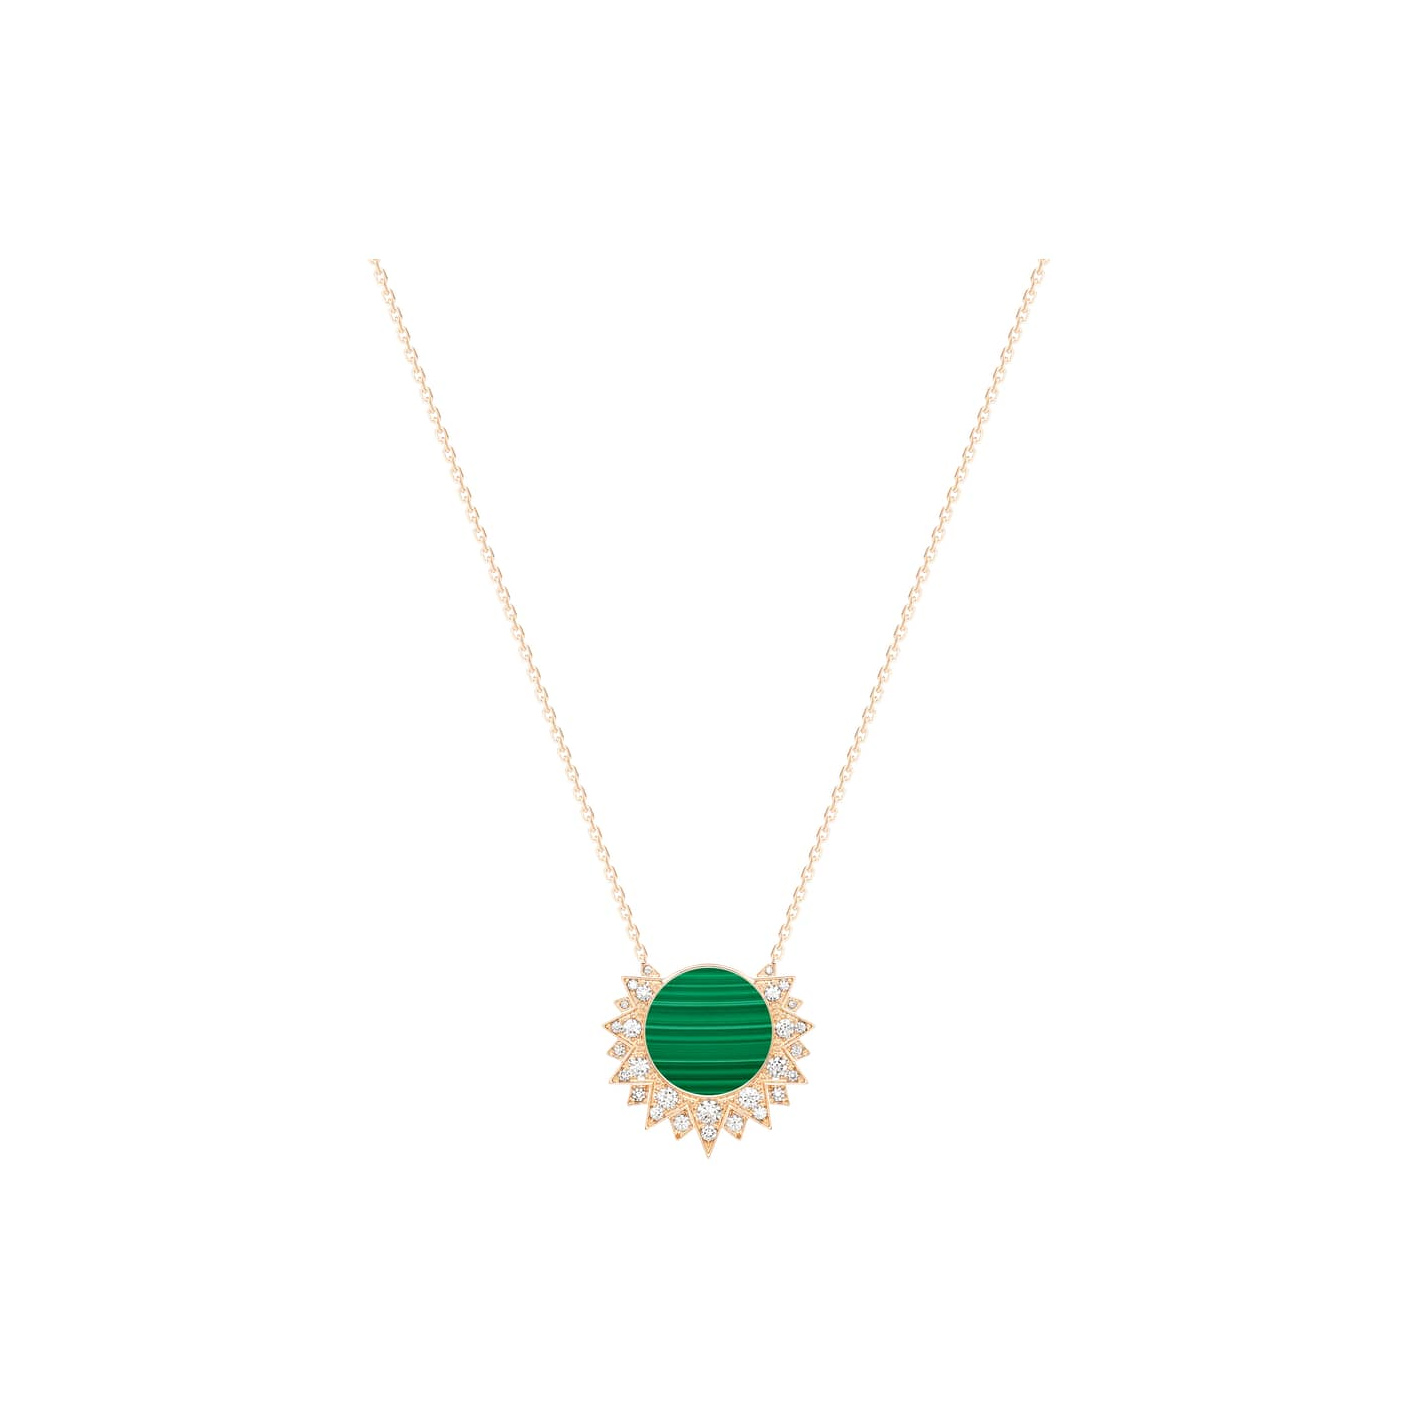 Wholesale OEM pendant OEM/ODM Jewelry in 18K rose gold set with a malachite custom made with your design